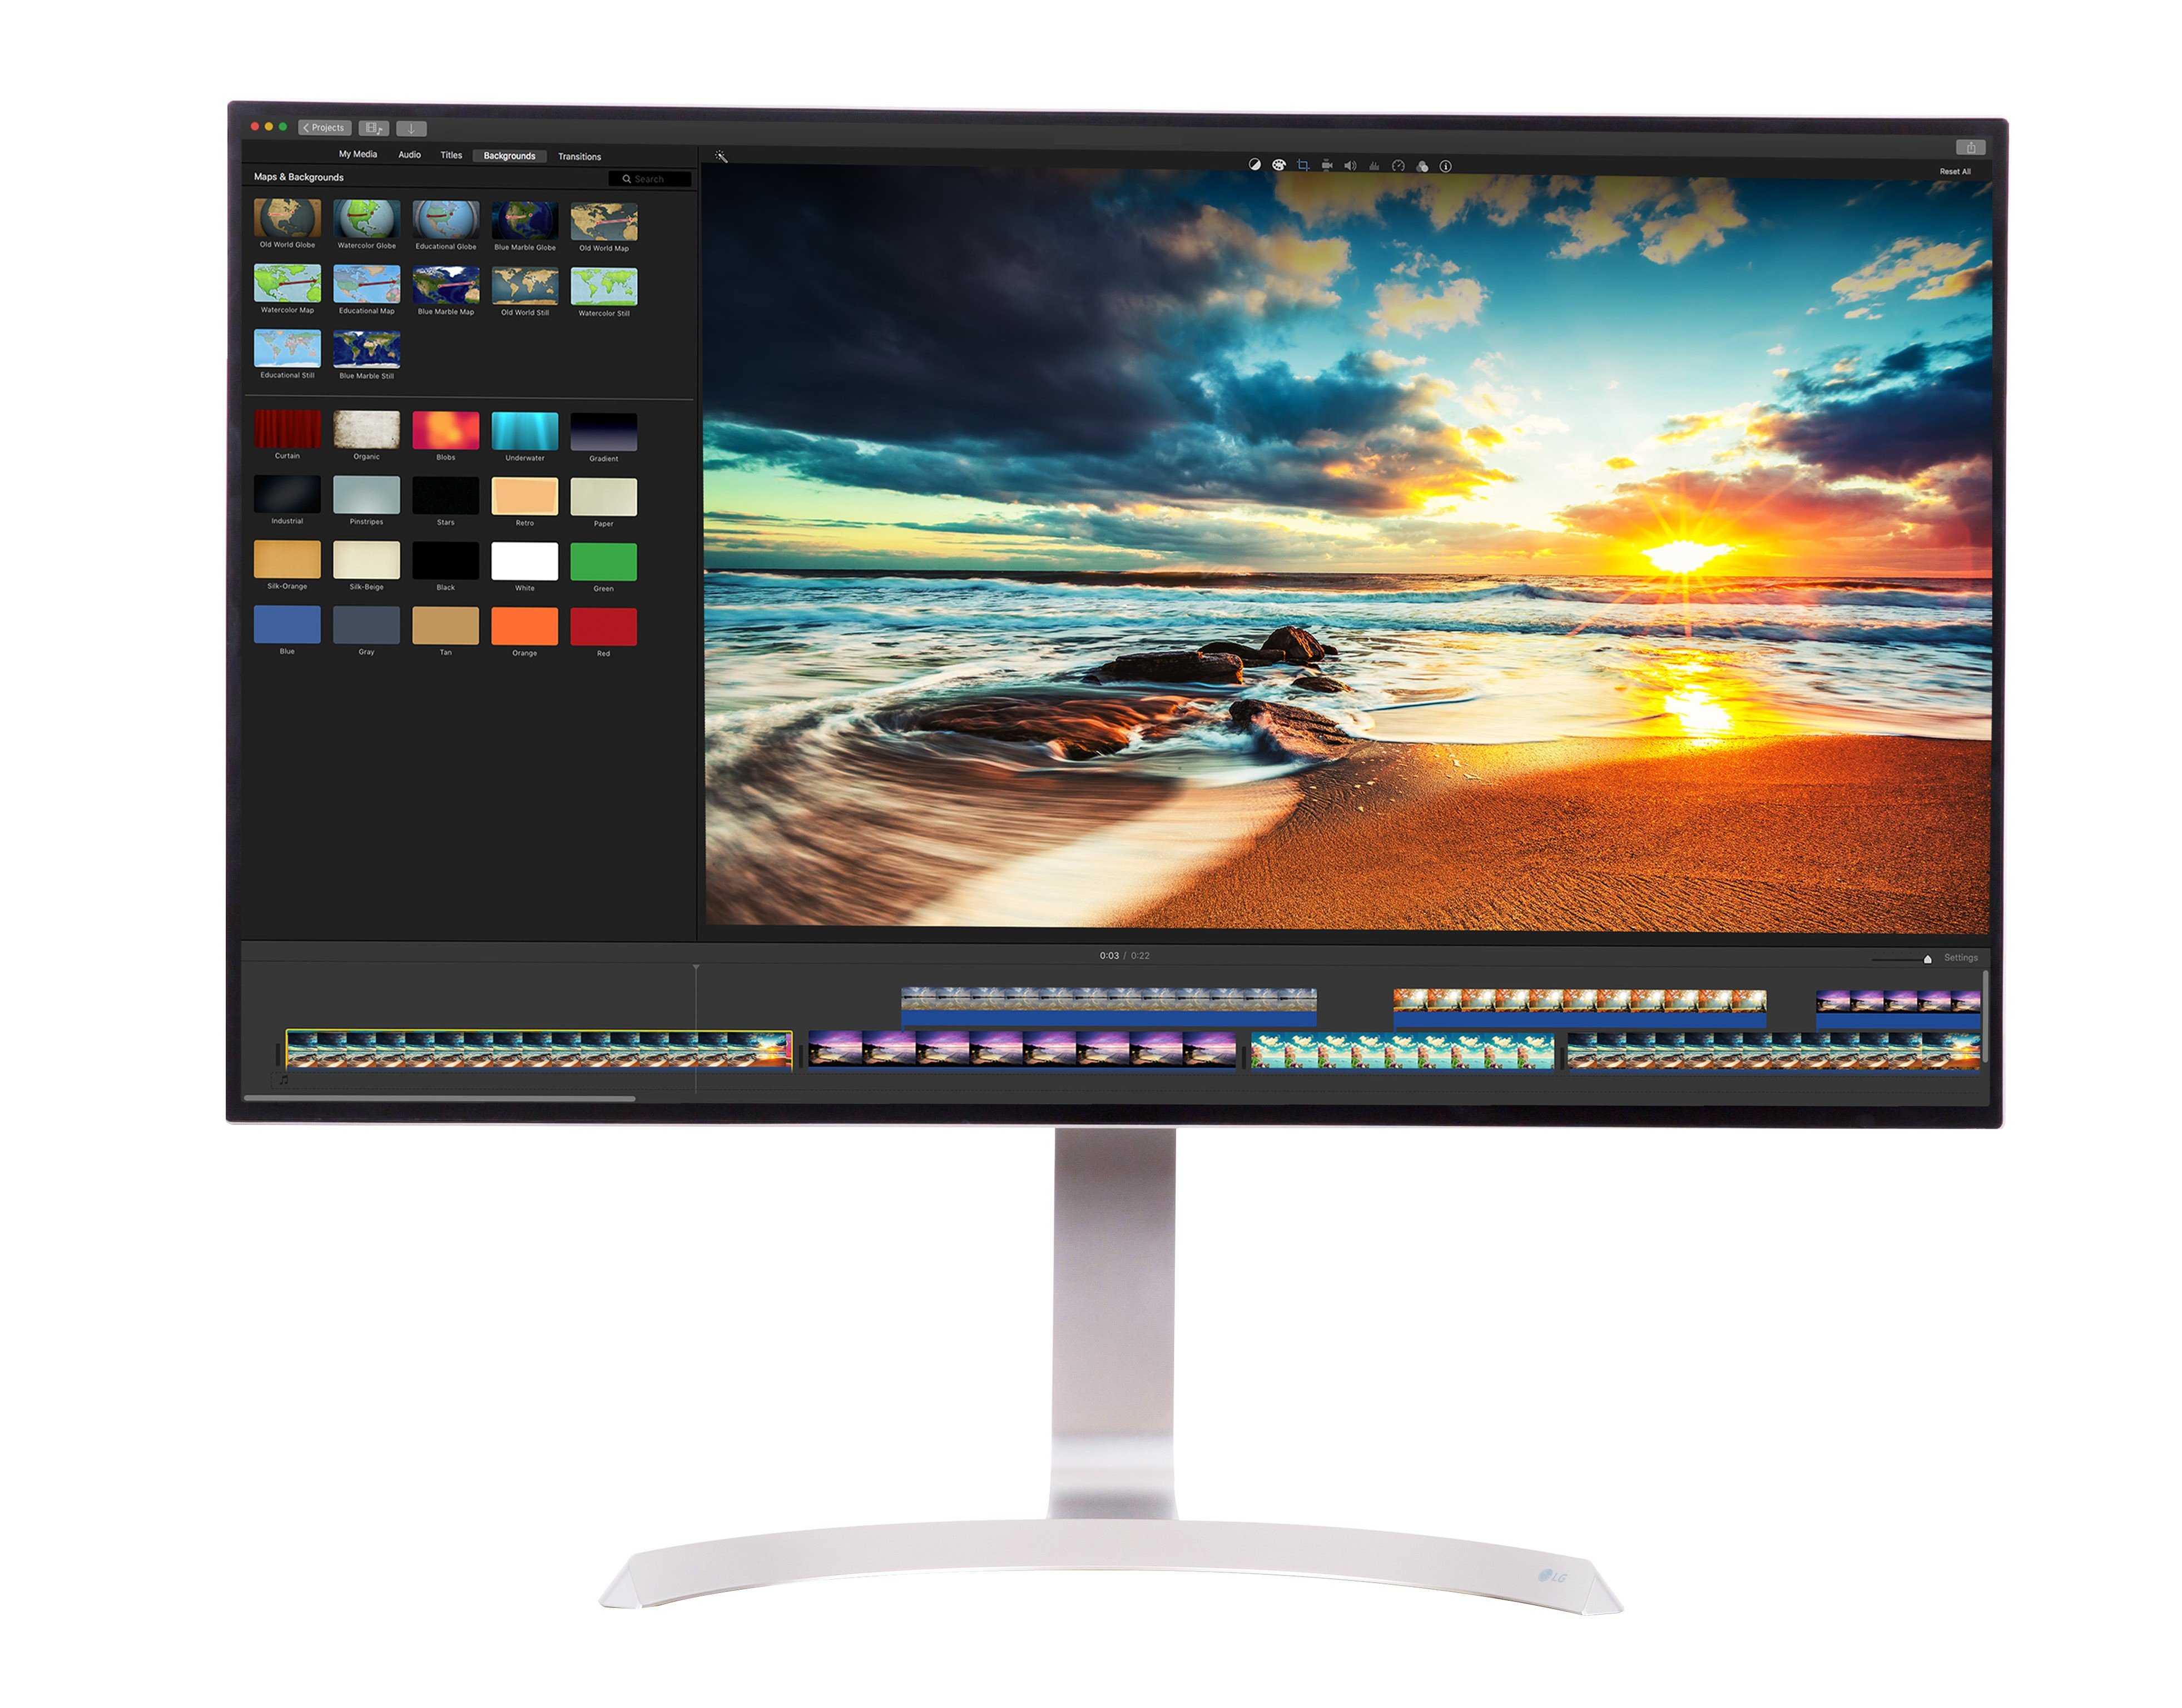 LG’s 32-inch 4K monitor with HDR10 now available for pre-order at $999